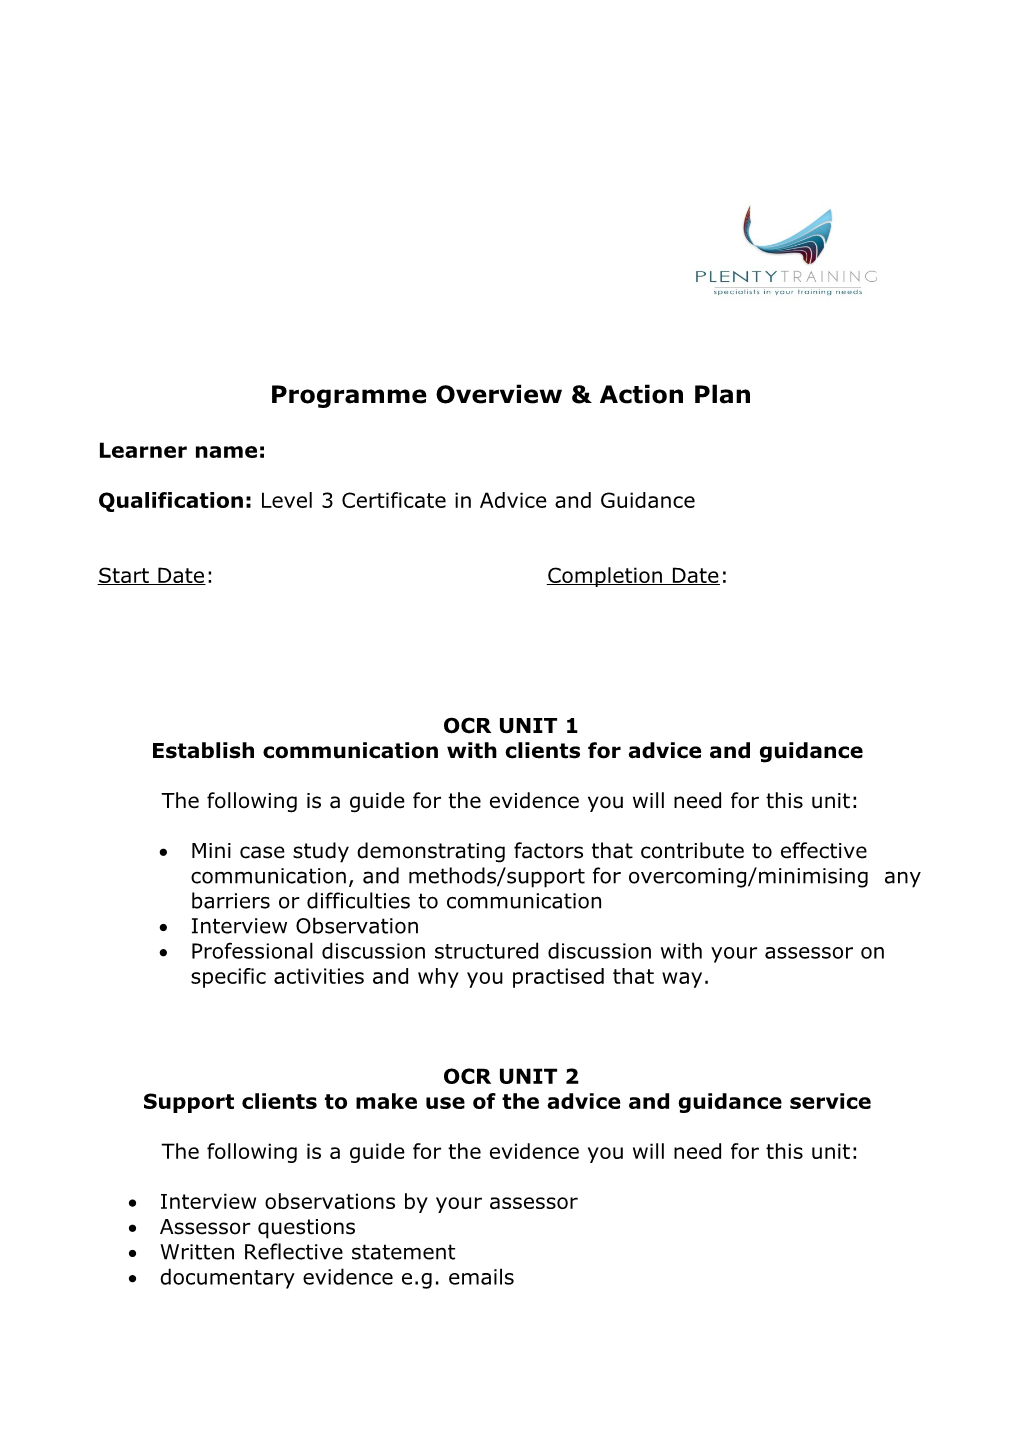 Programme Overview & Action Plan